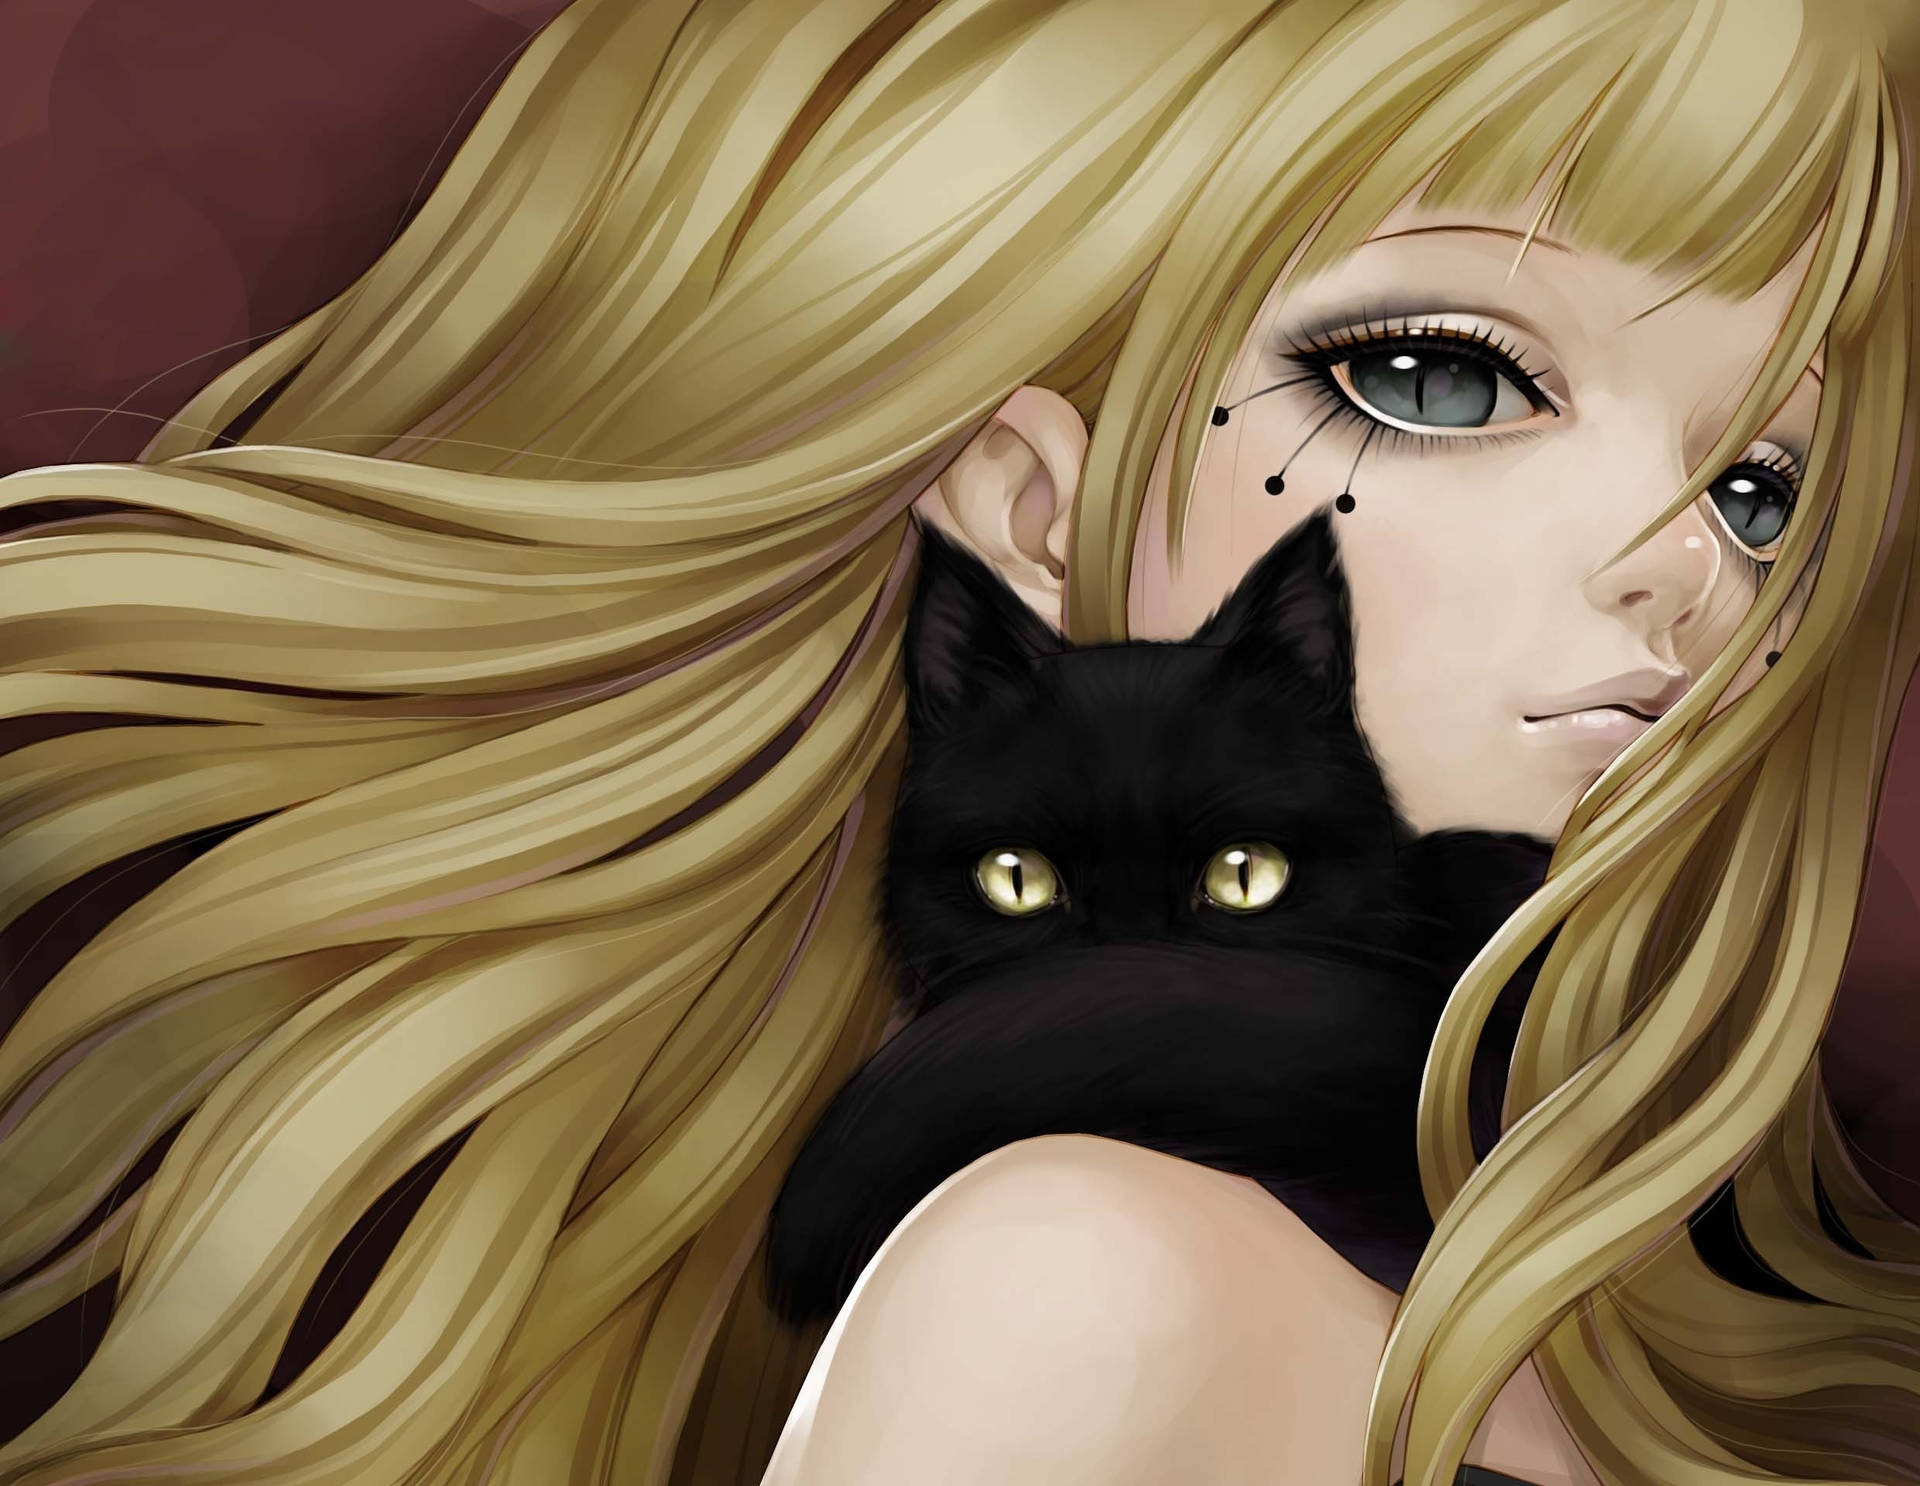 Blonde Girl With Anime Cat Wallpaper